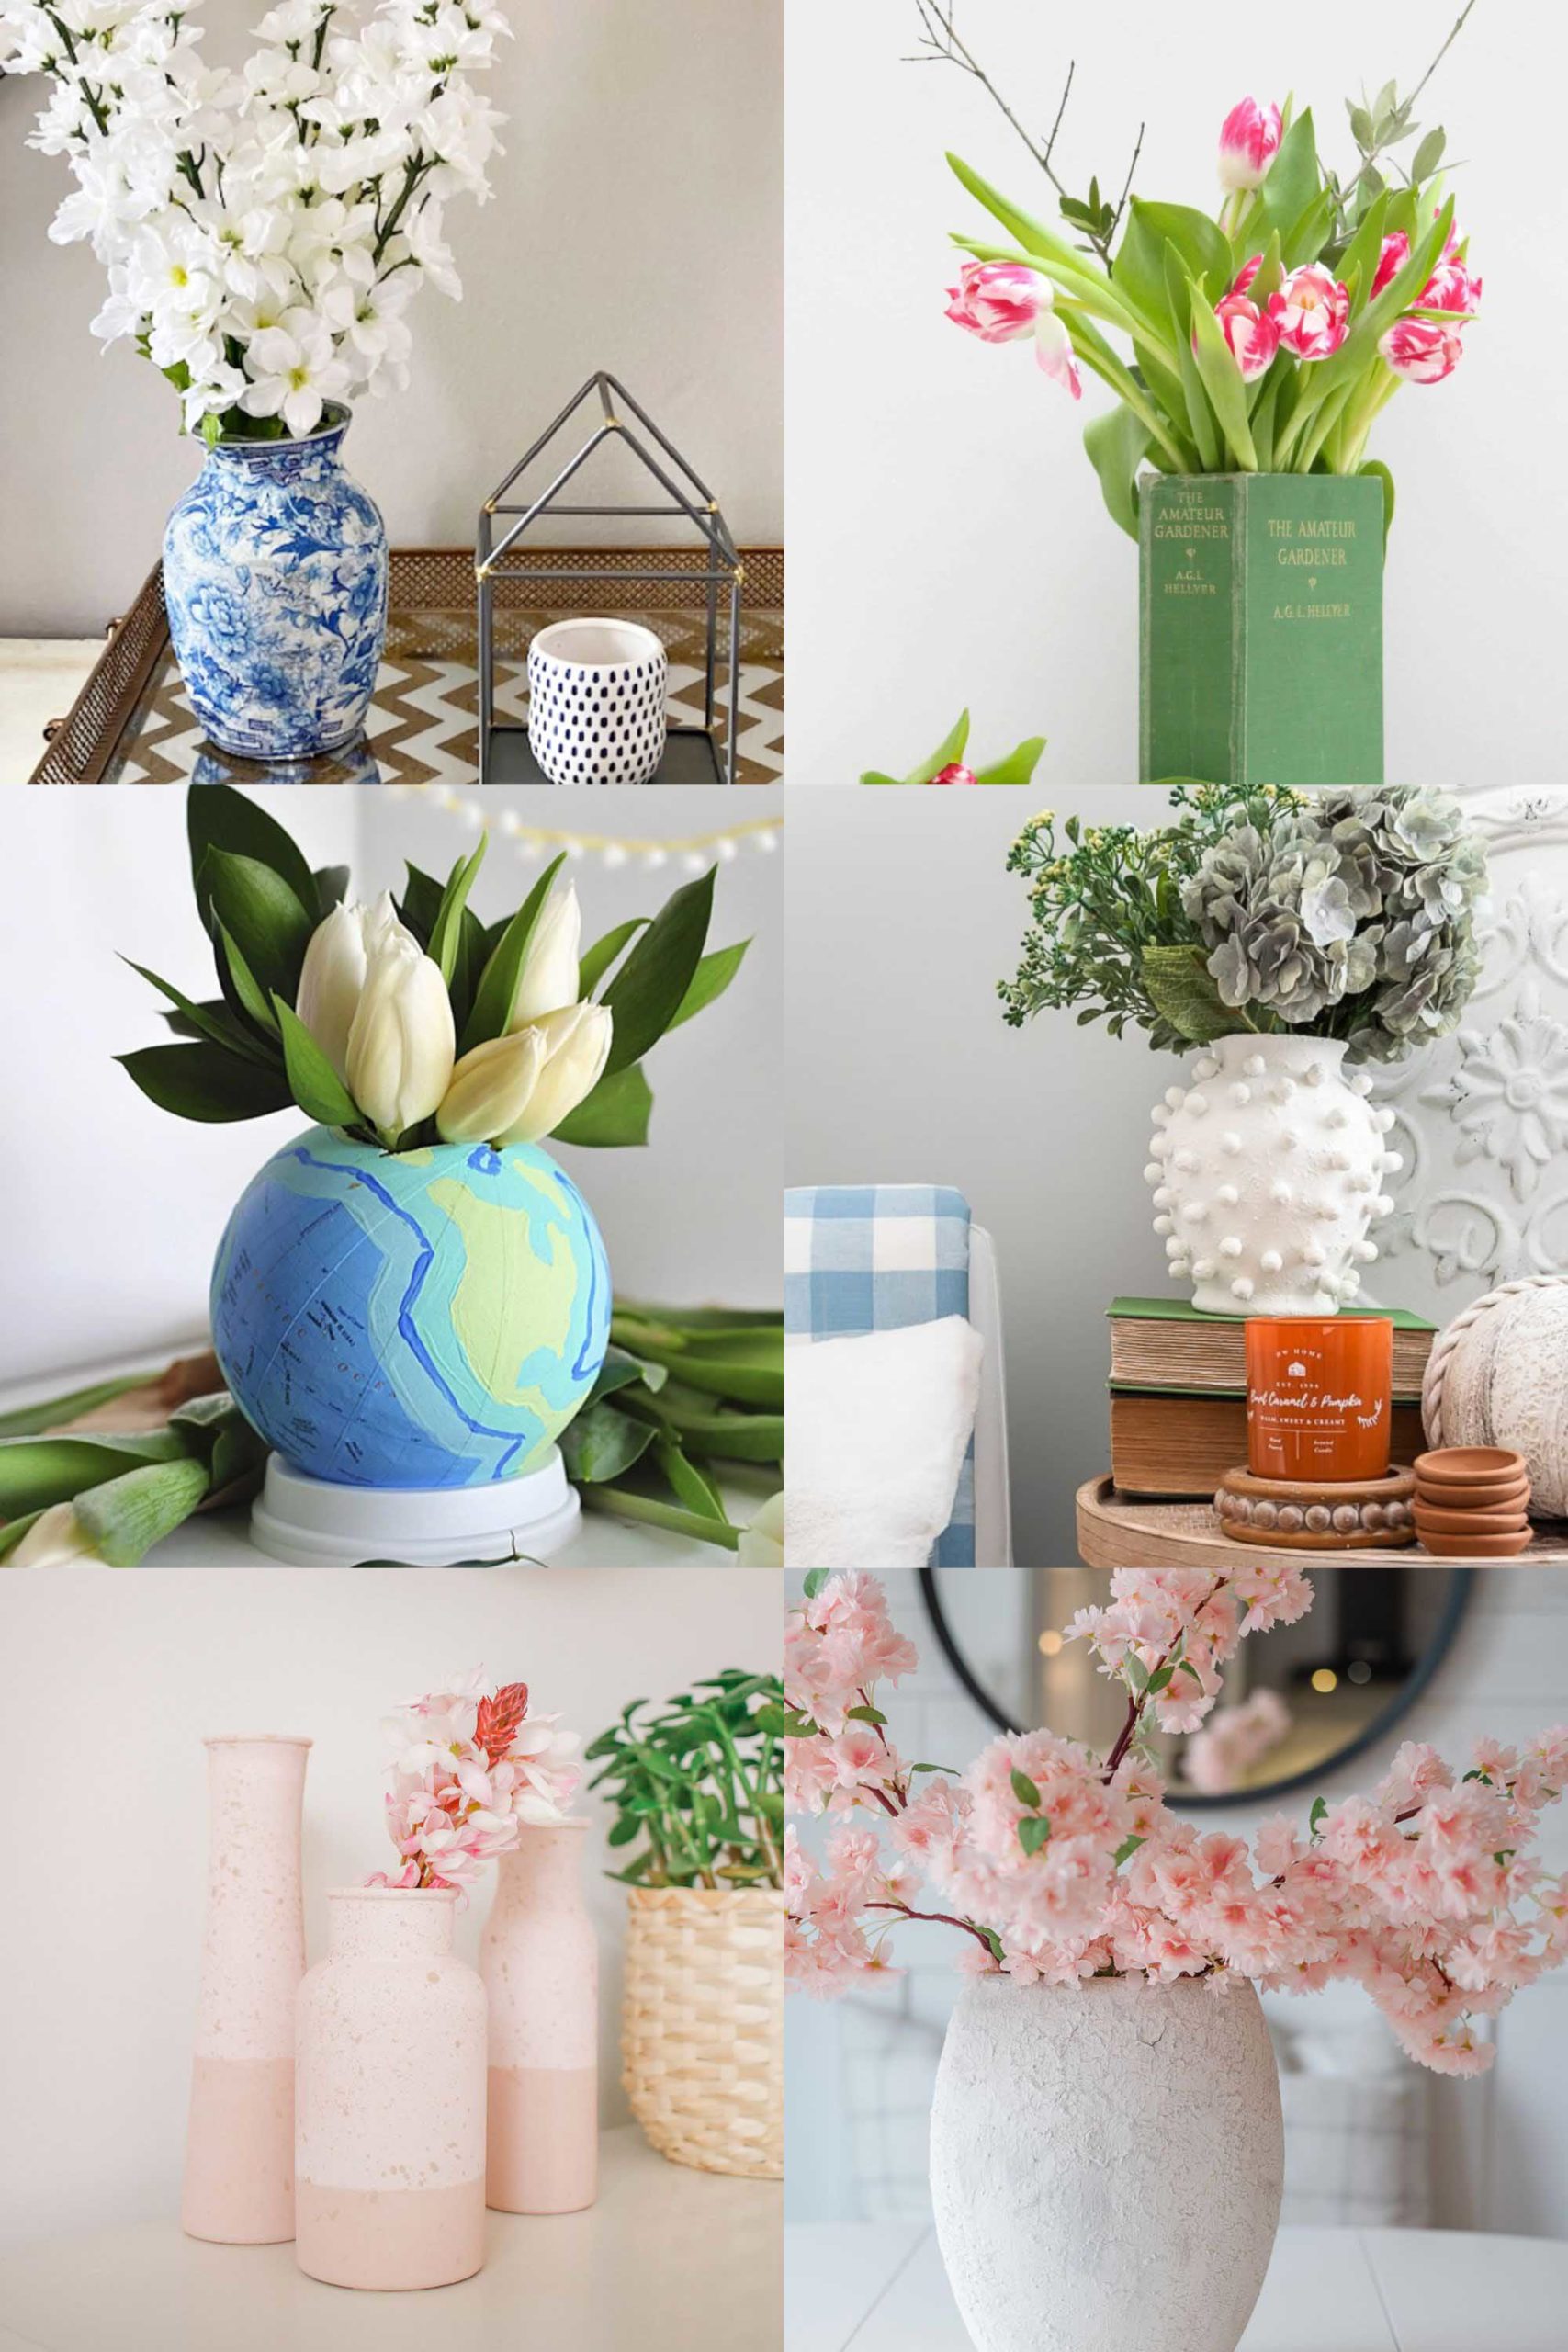 Decorate a Vase One of These Pretty Ways - Mod Podge Rocks